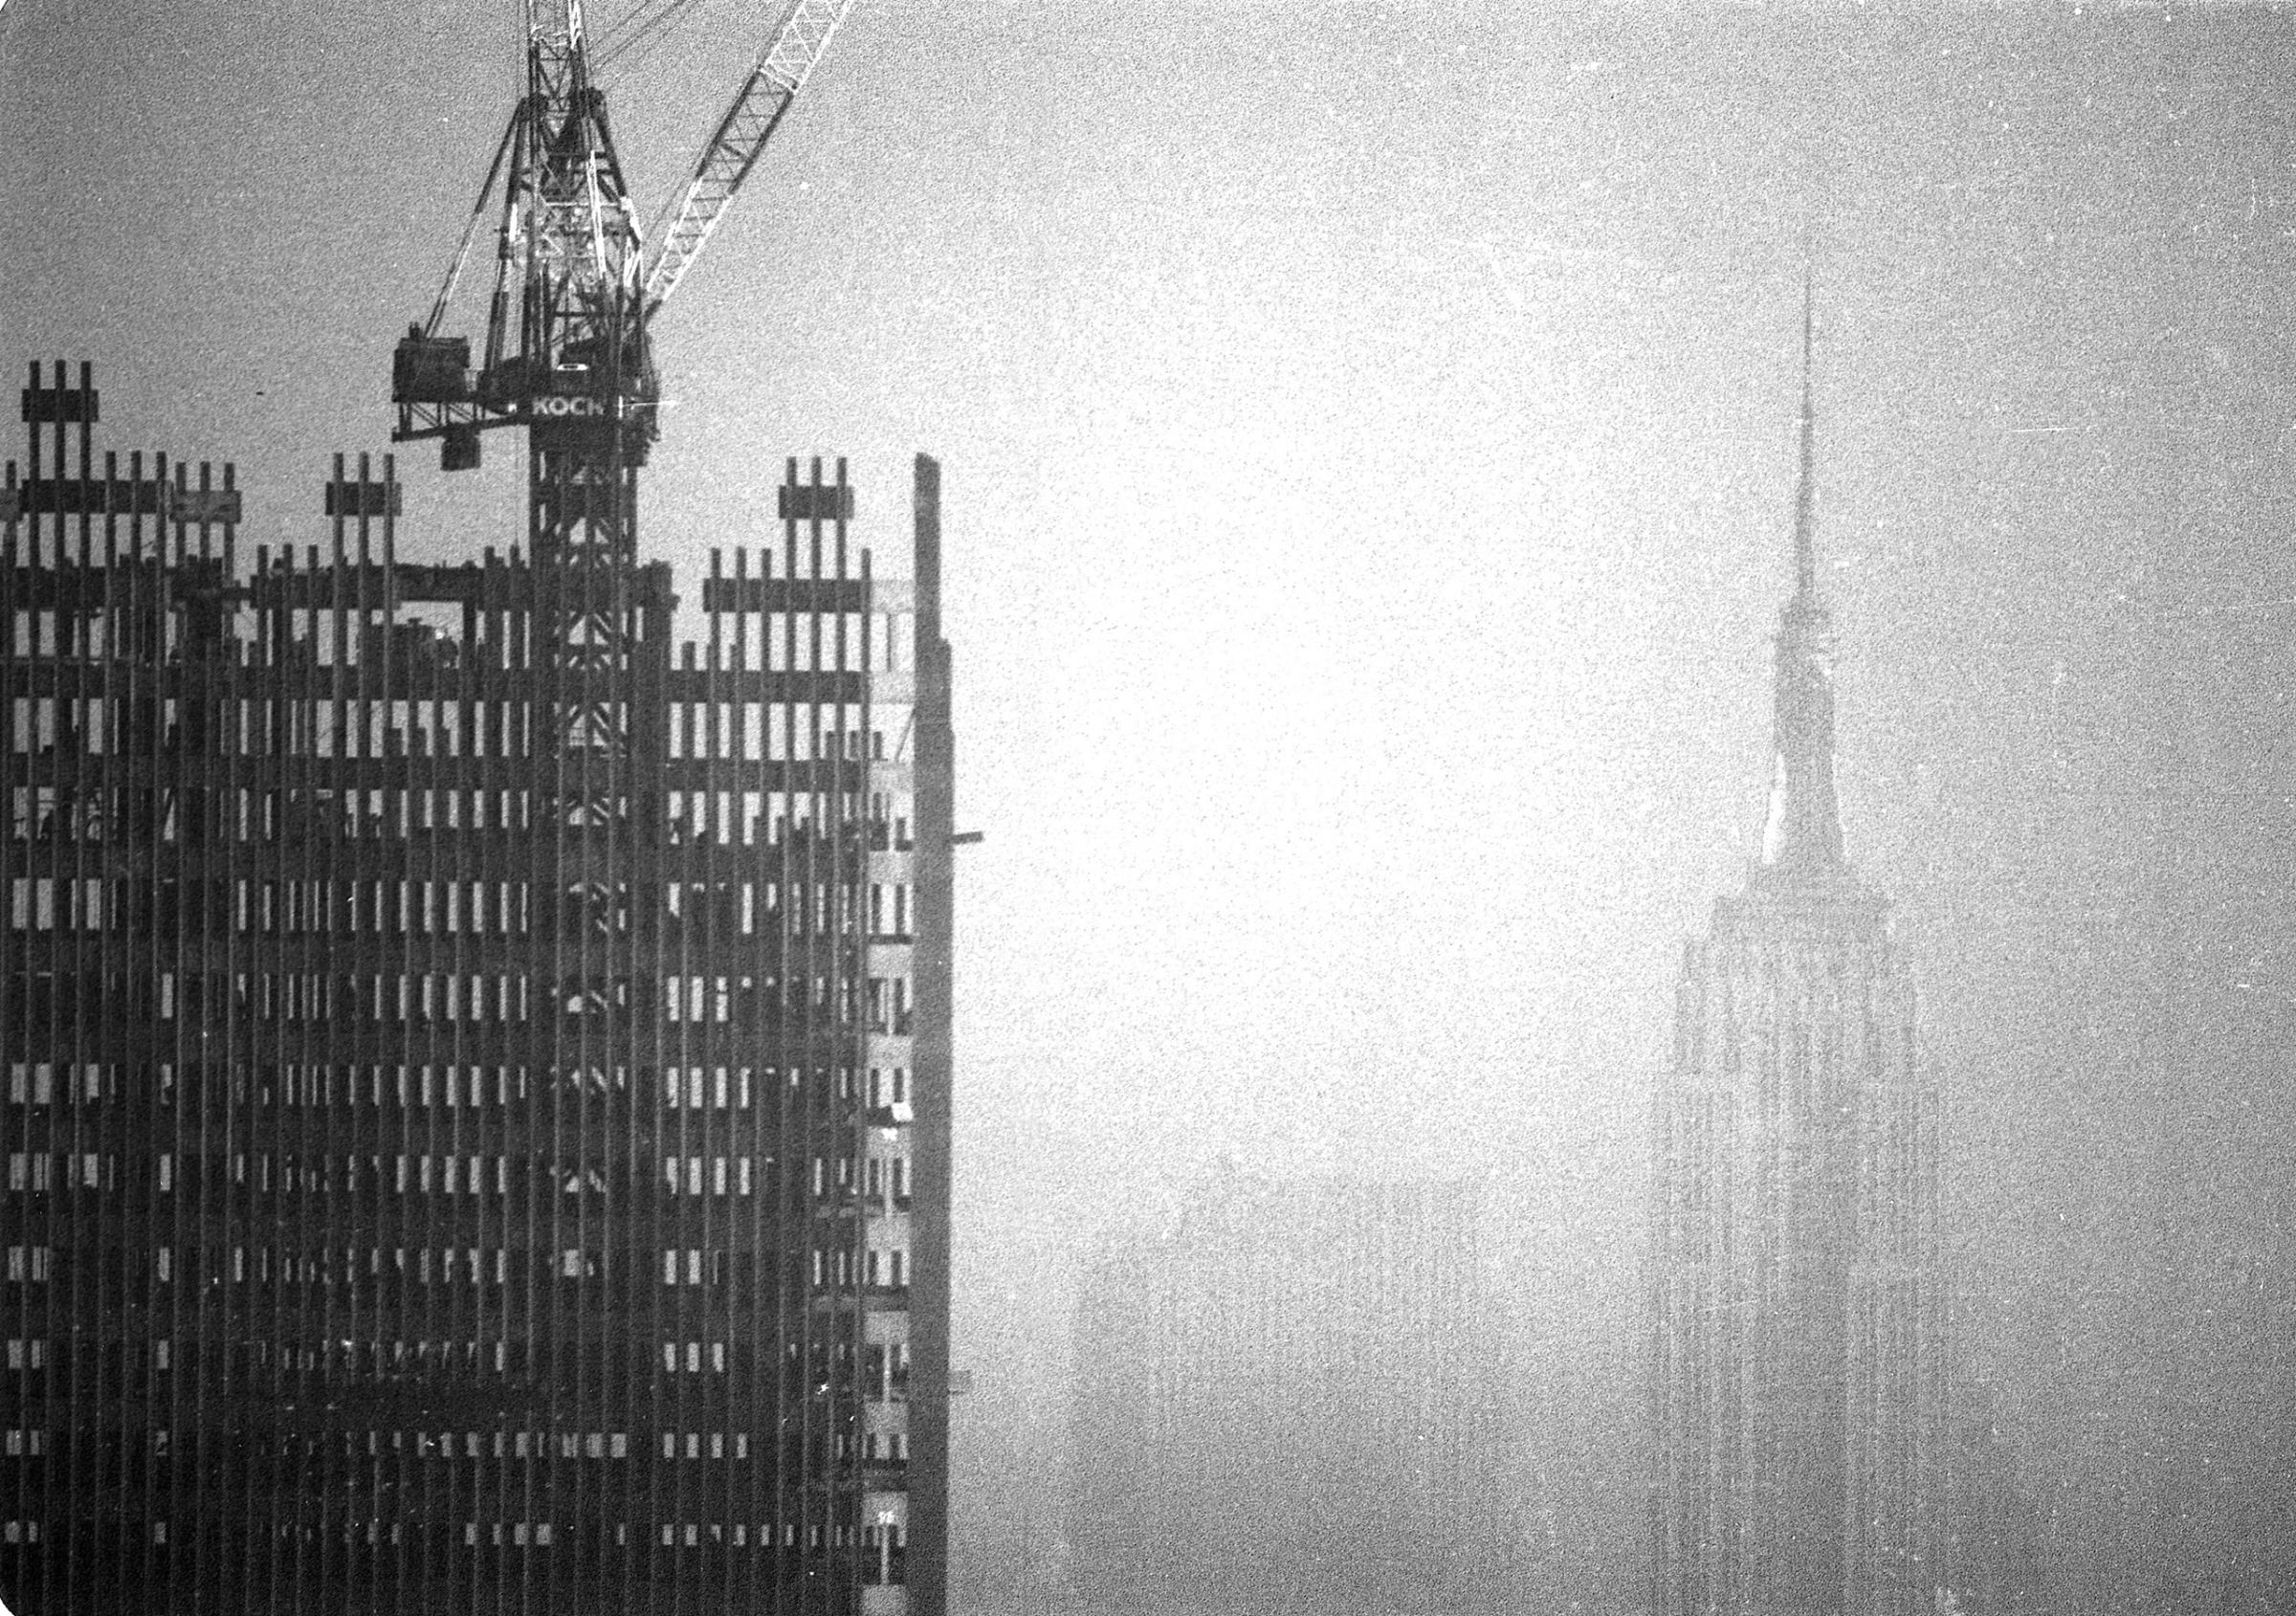 Construction of one of the twin towers at the World Trade Center in lower Manhattan, New York City, on October 20, 1970. In the background at right is the Empire State Building with its antenna.